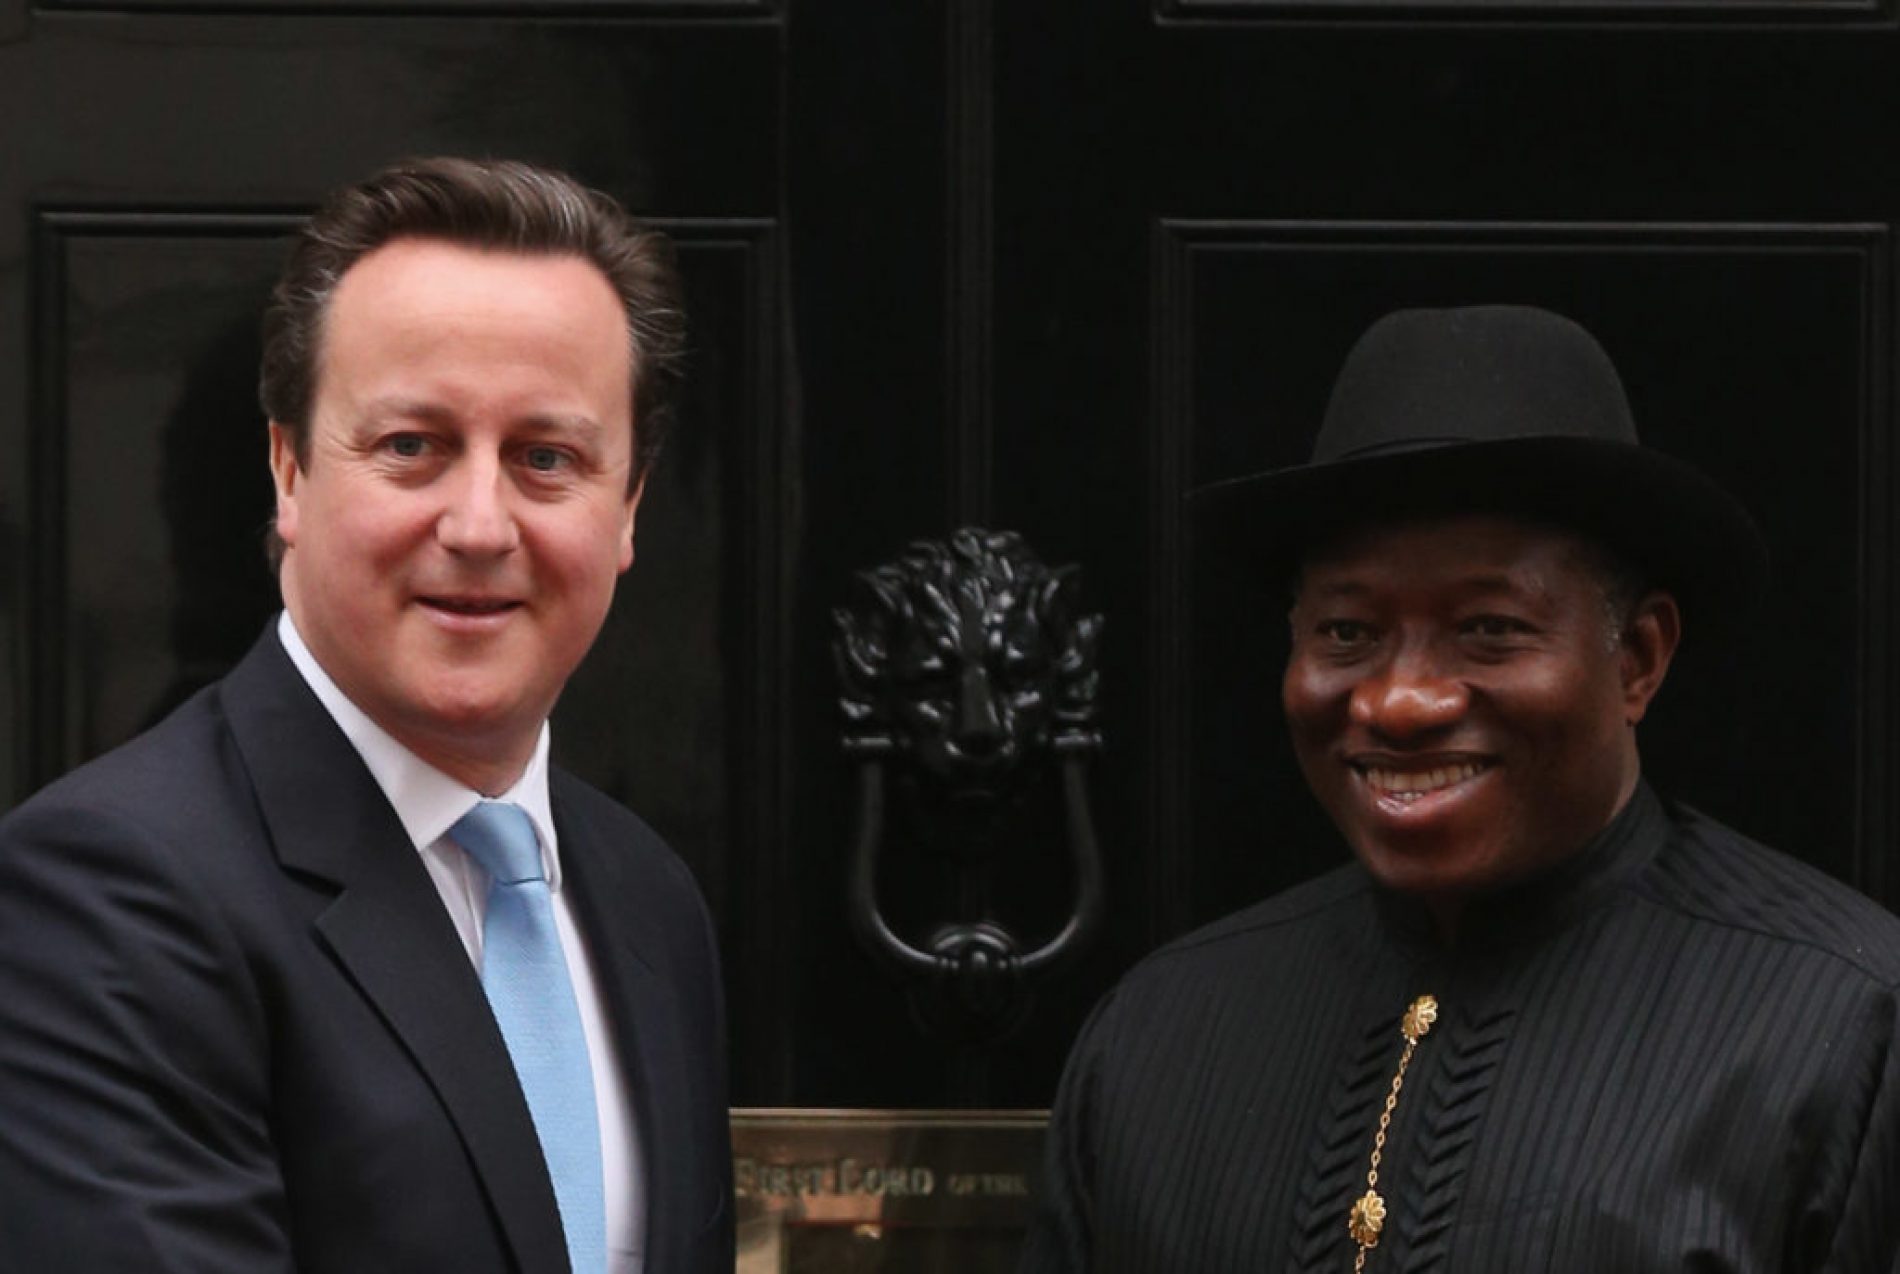 Goodluck Jonathan claims David Cameron has a grudge against him because he refused to legalise homosexuality in Nigeria